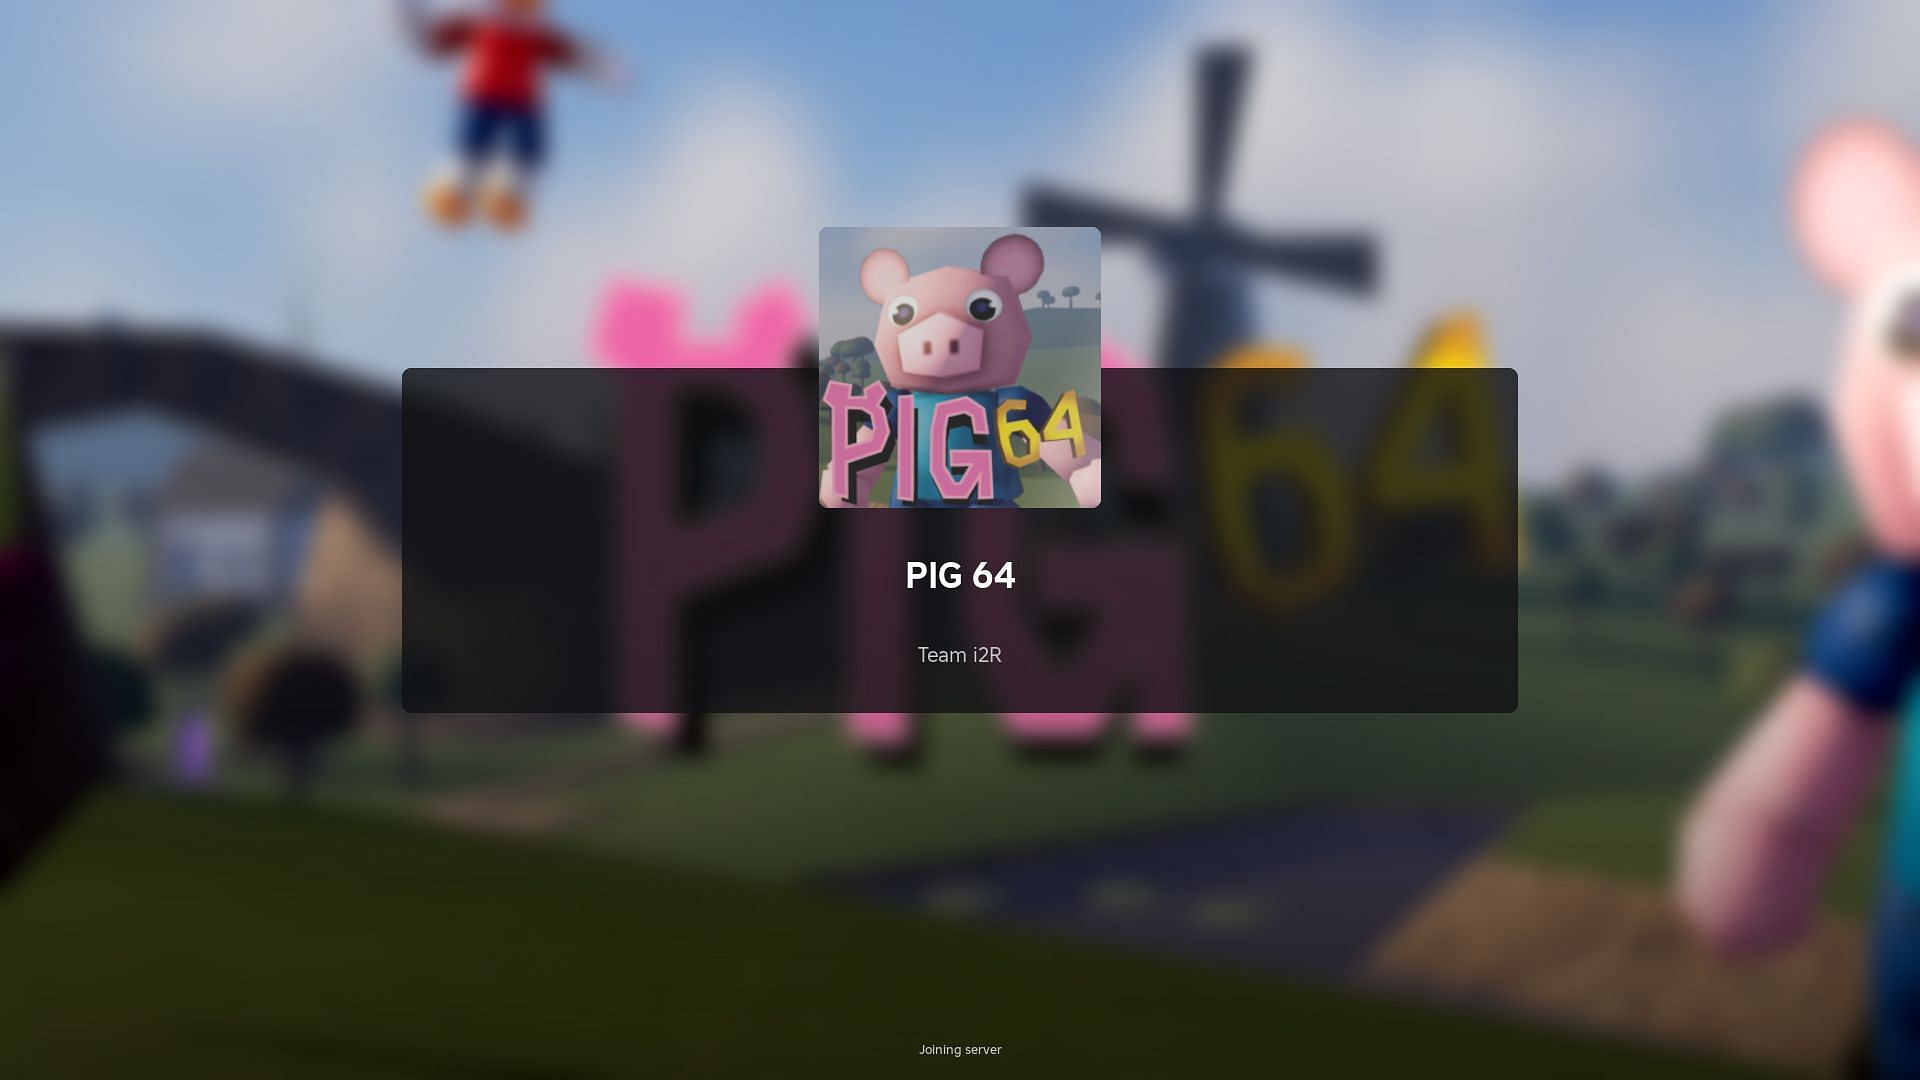 Finding all Secret pages in Pig 64